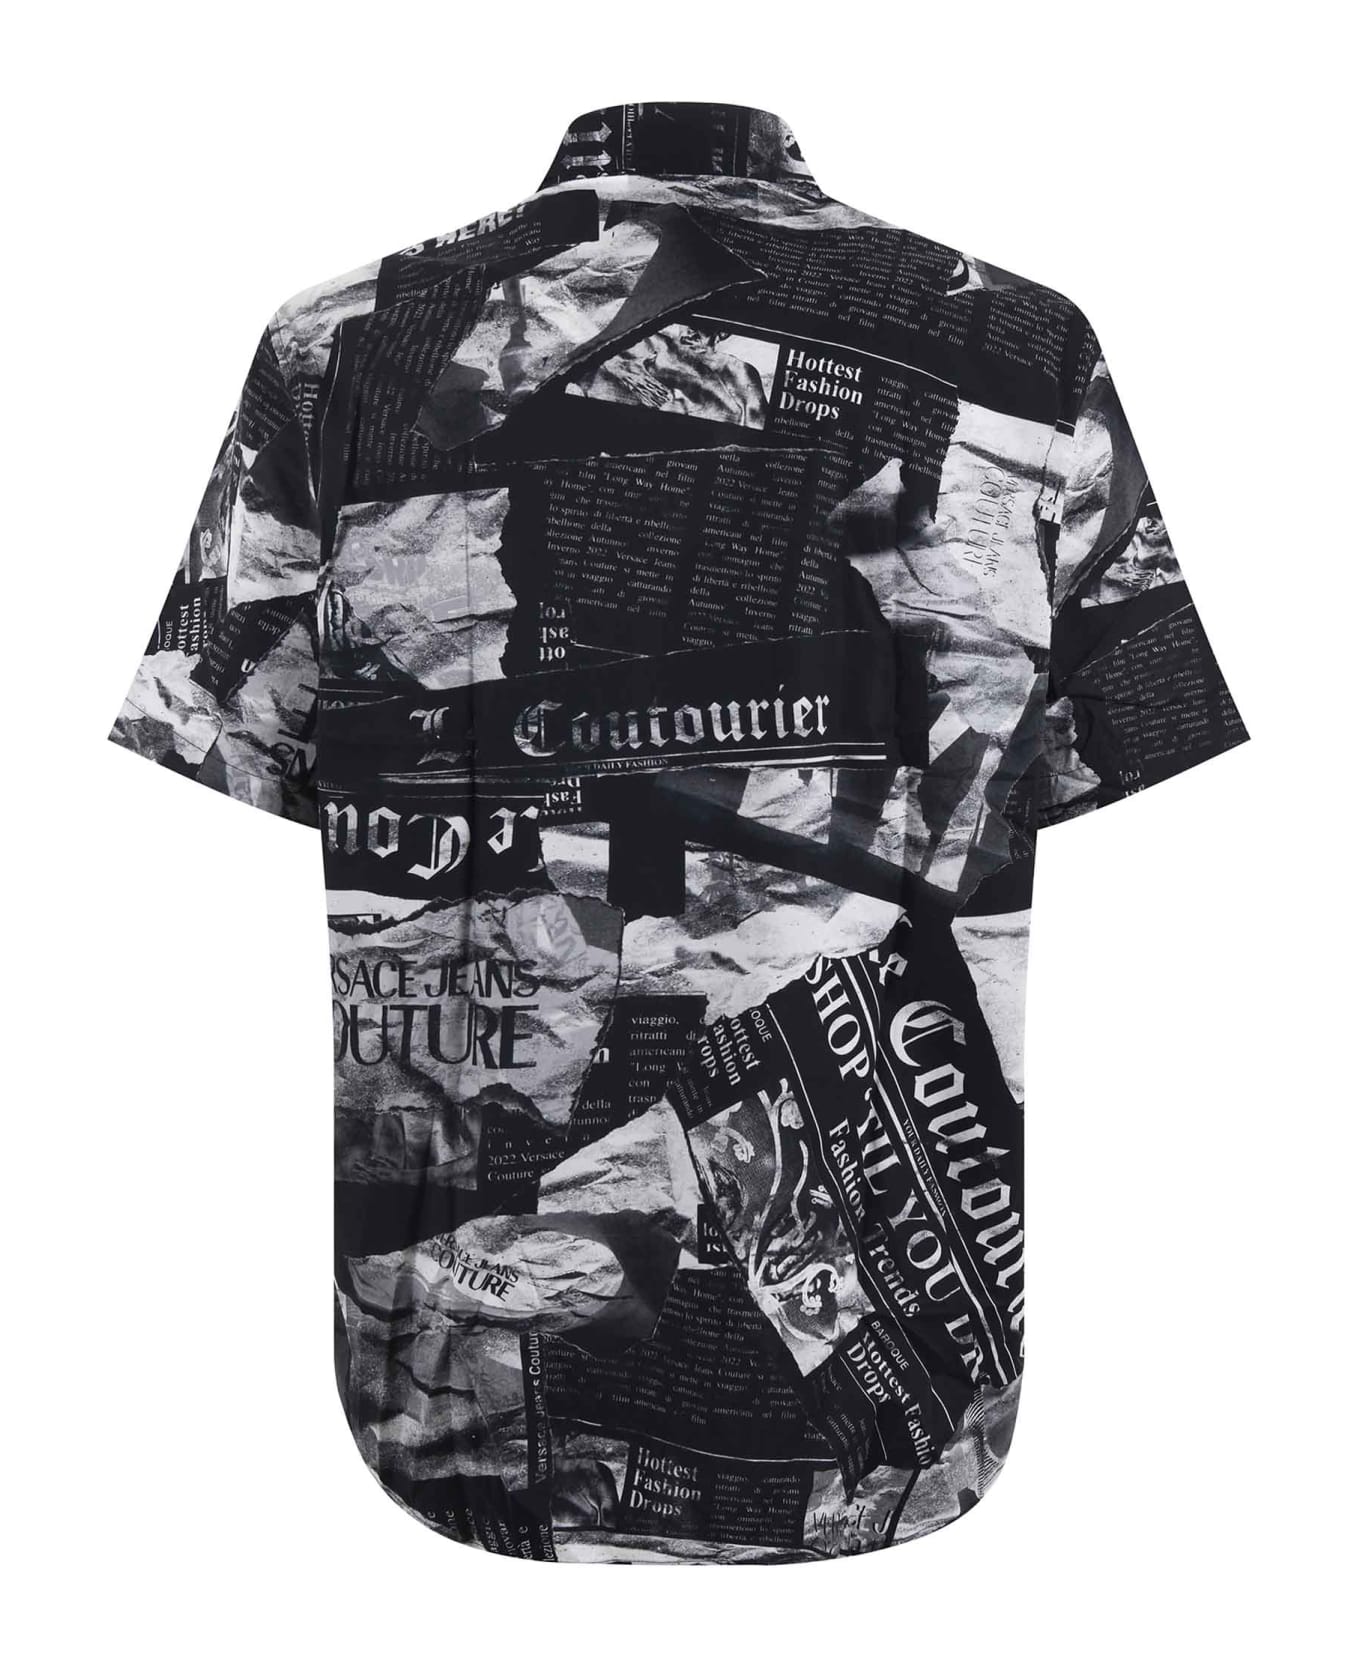 Versace Jeans Couture Pattern-printed Short-sleeved Shirt - Nero/grigio